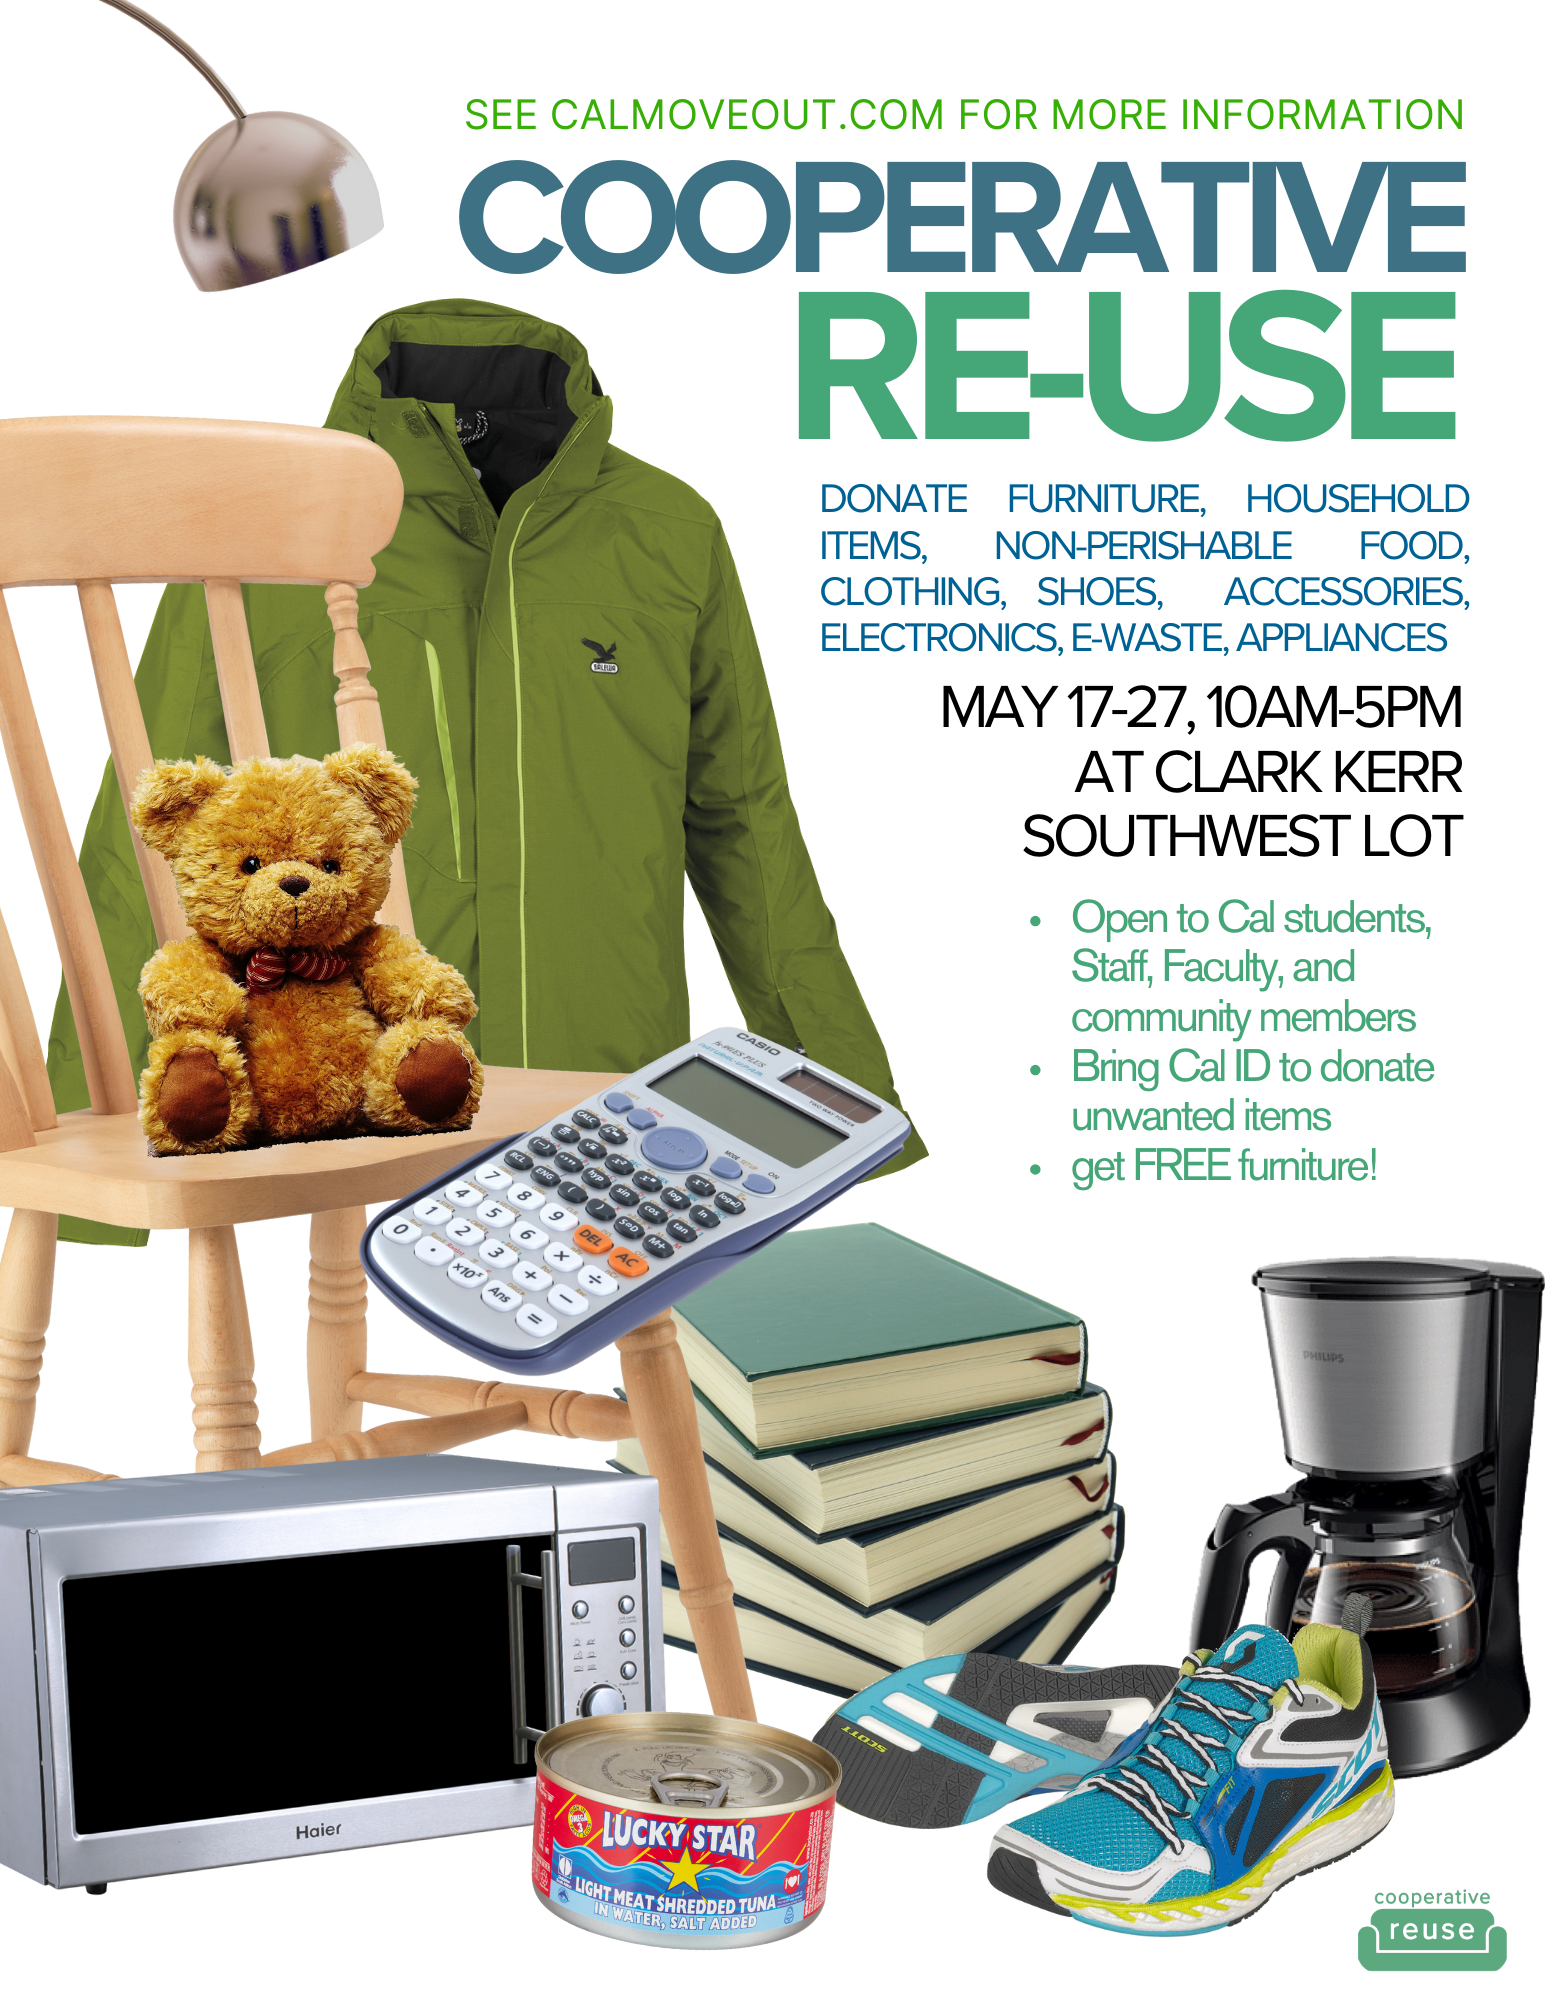 Cooperative Reuse event flyer, illustration of household items